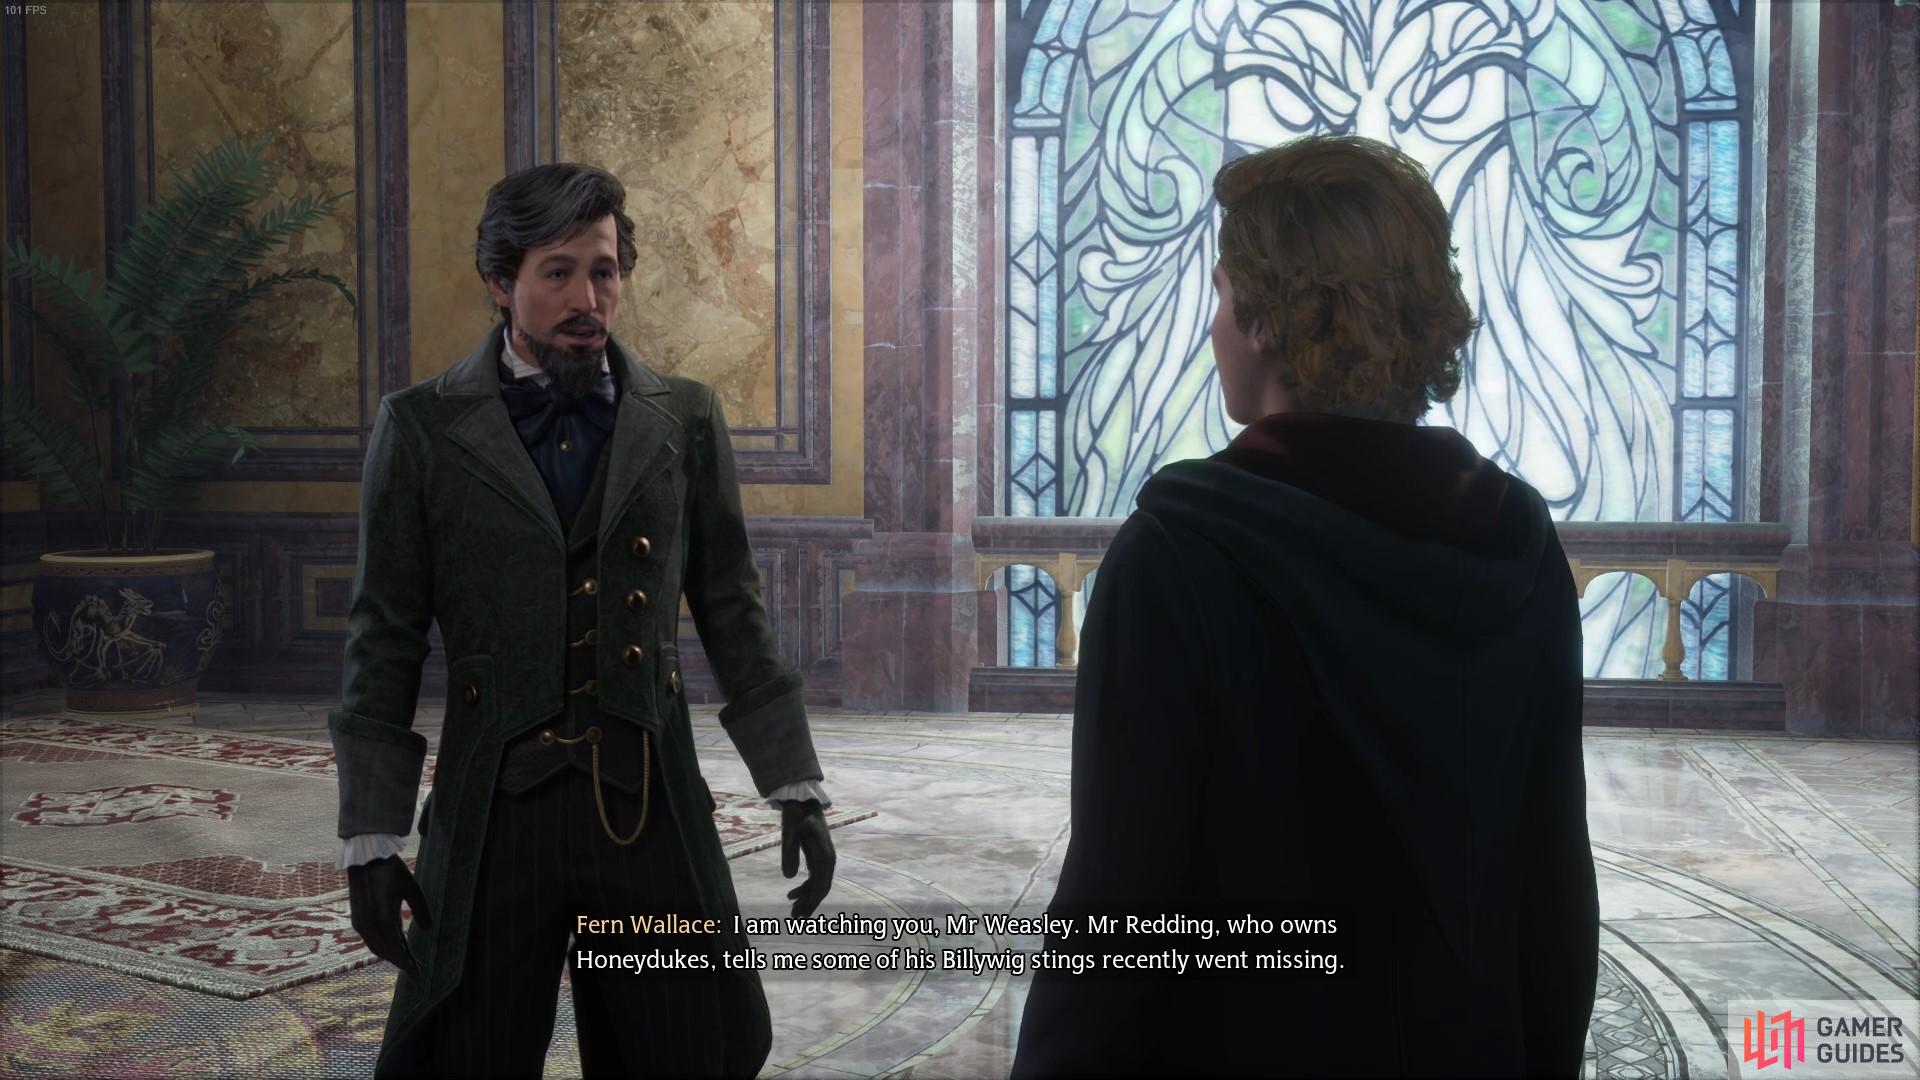 Doing Gareth's side quest will award unique dialogue.